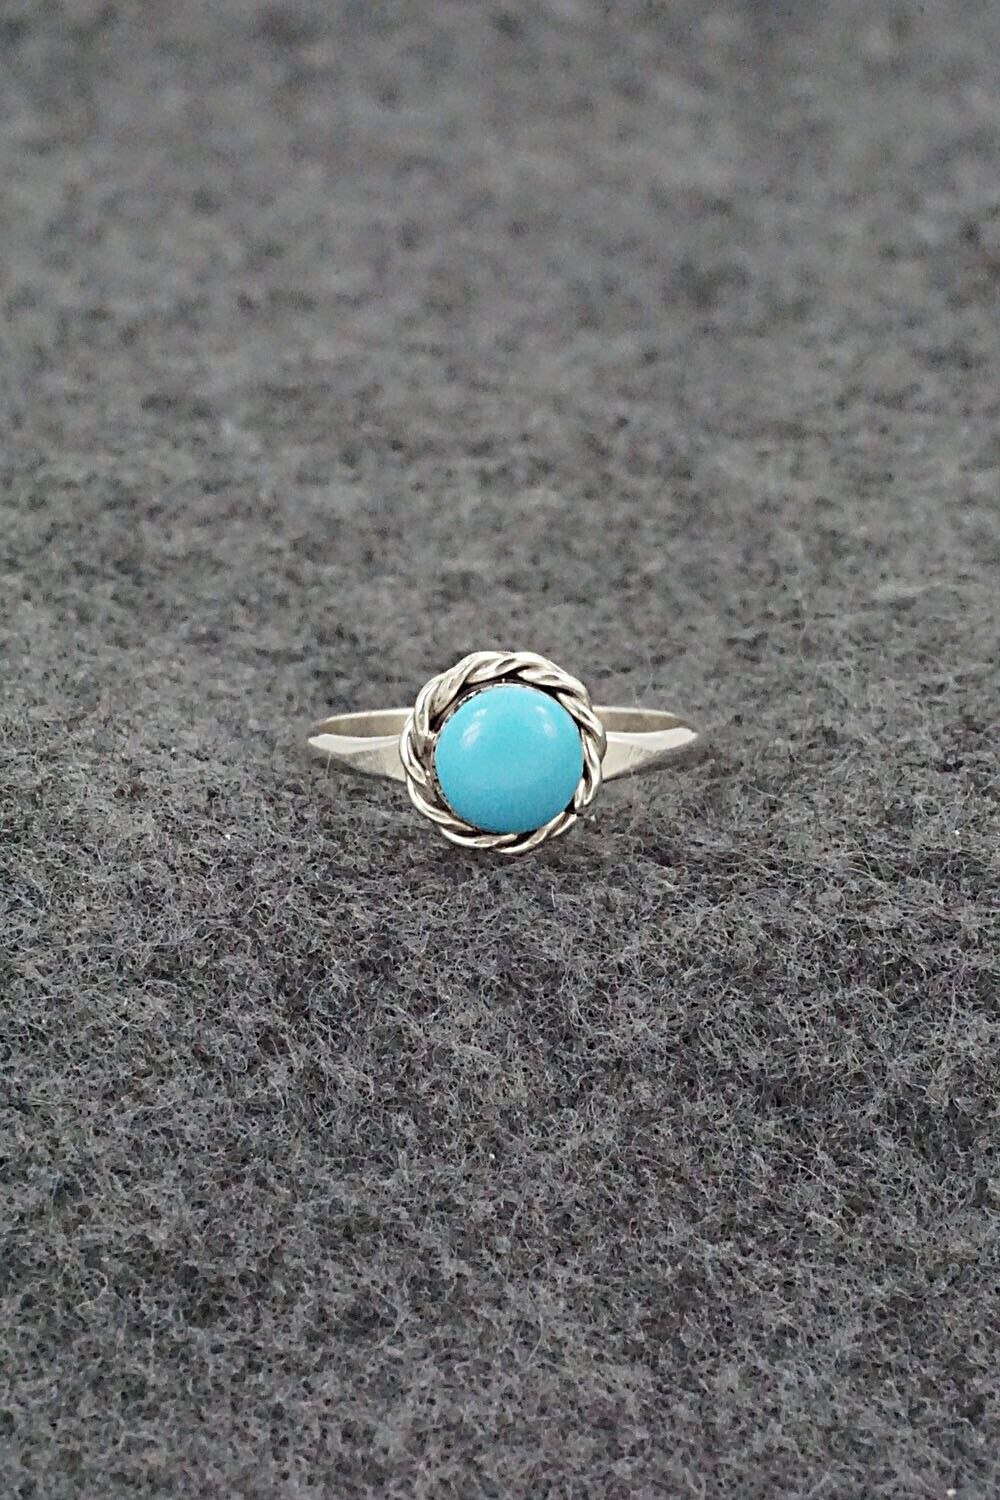 Turquoise & Sterling Silver Ring - Leander Cachini - Size 5